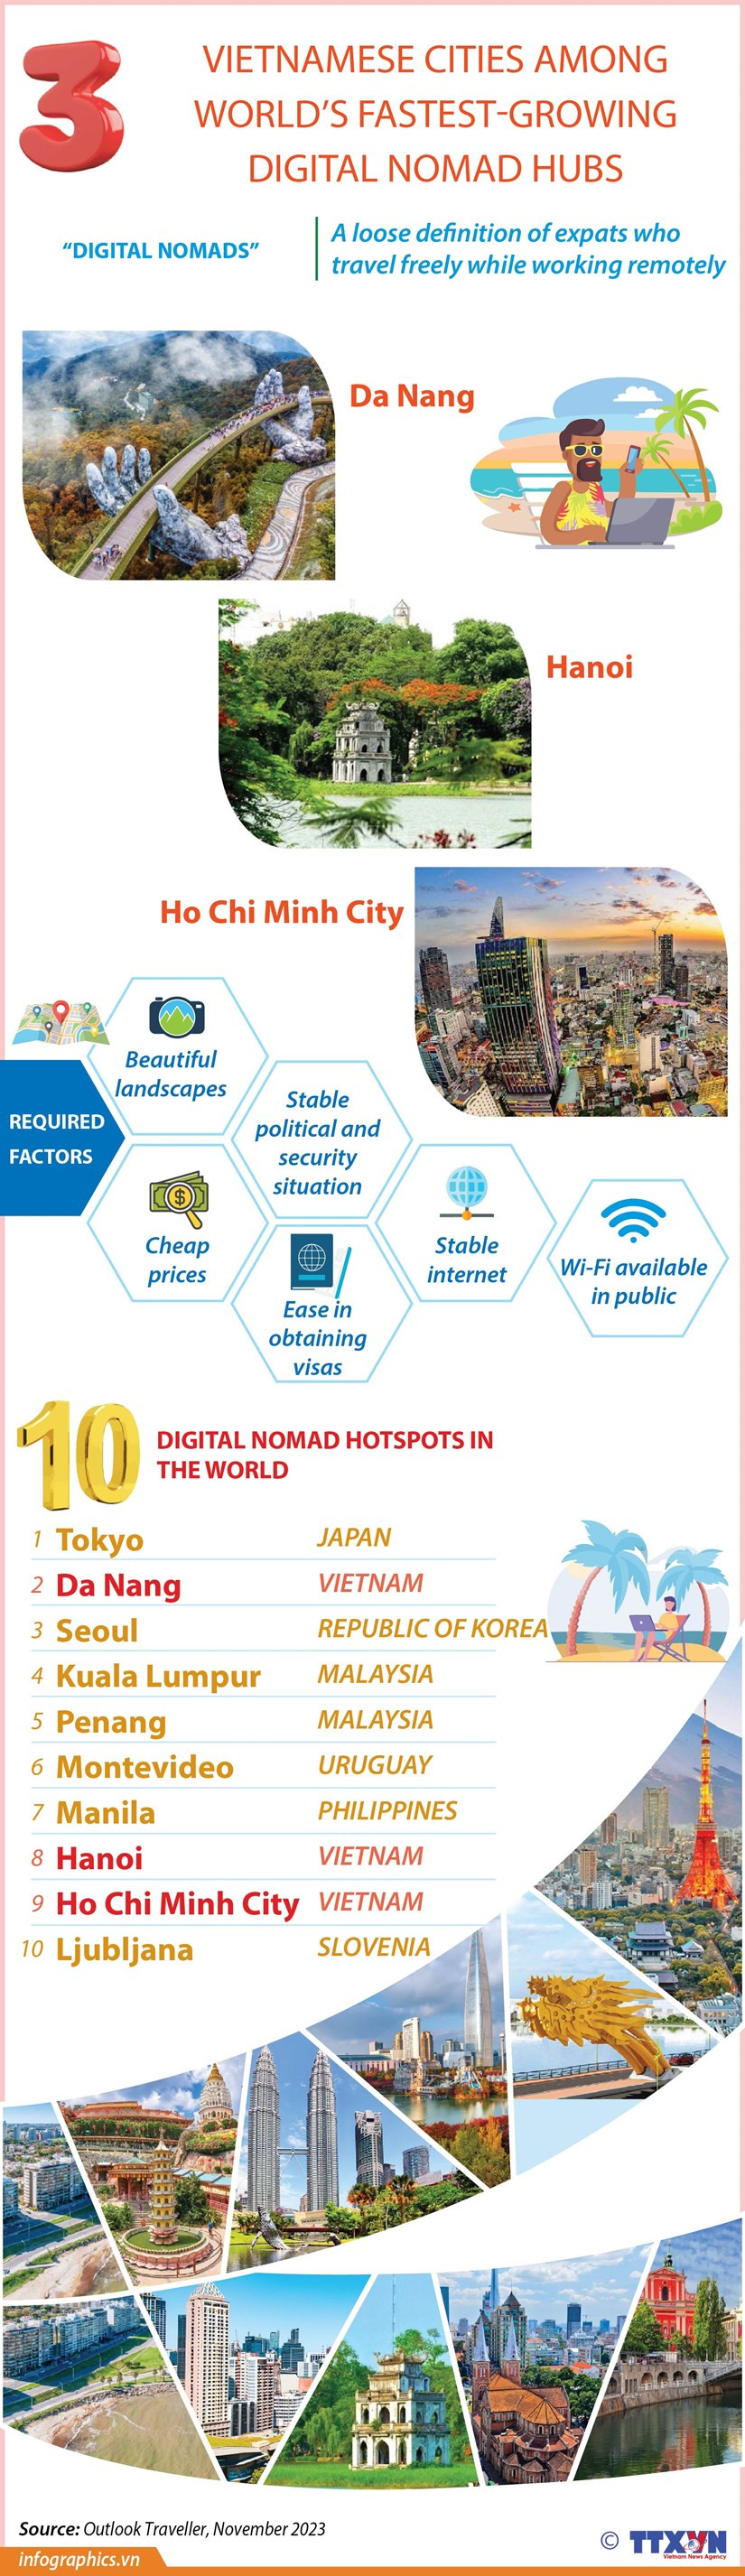 Three Vietnamese cities among world’s fastest-growing digital nomad hubs hinh anh 1